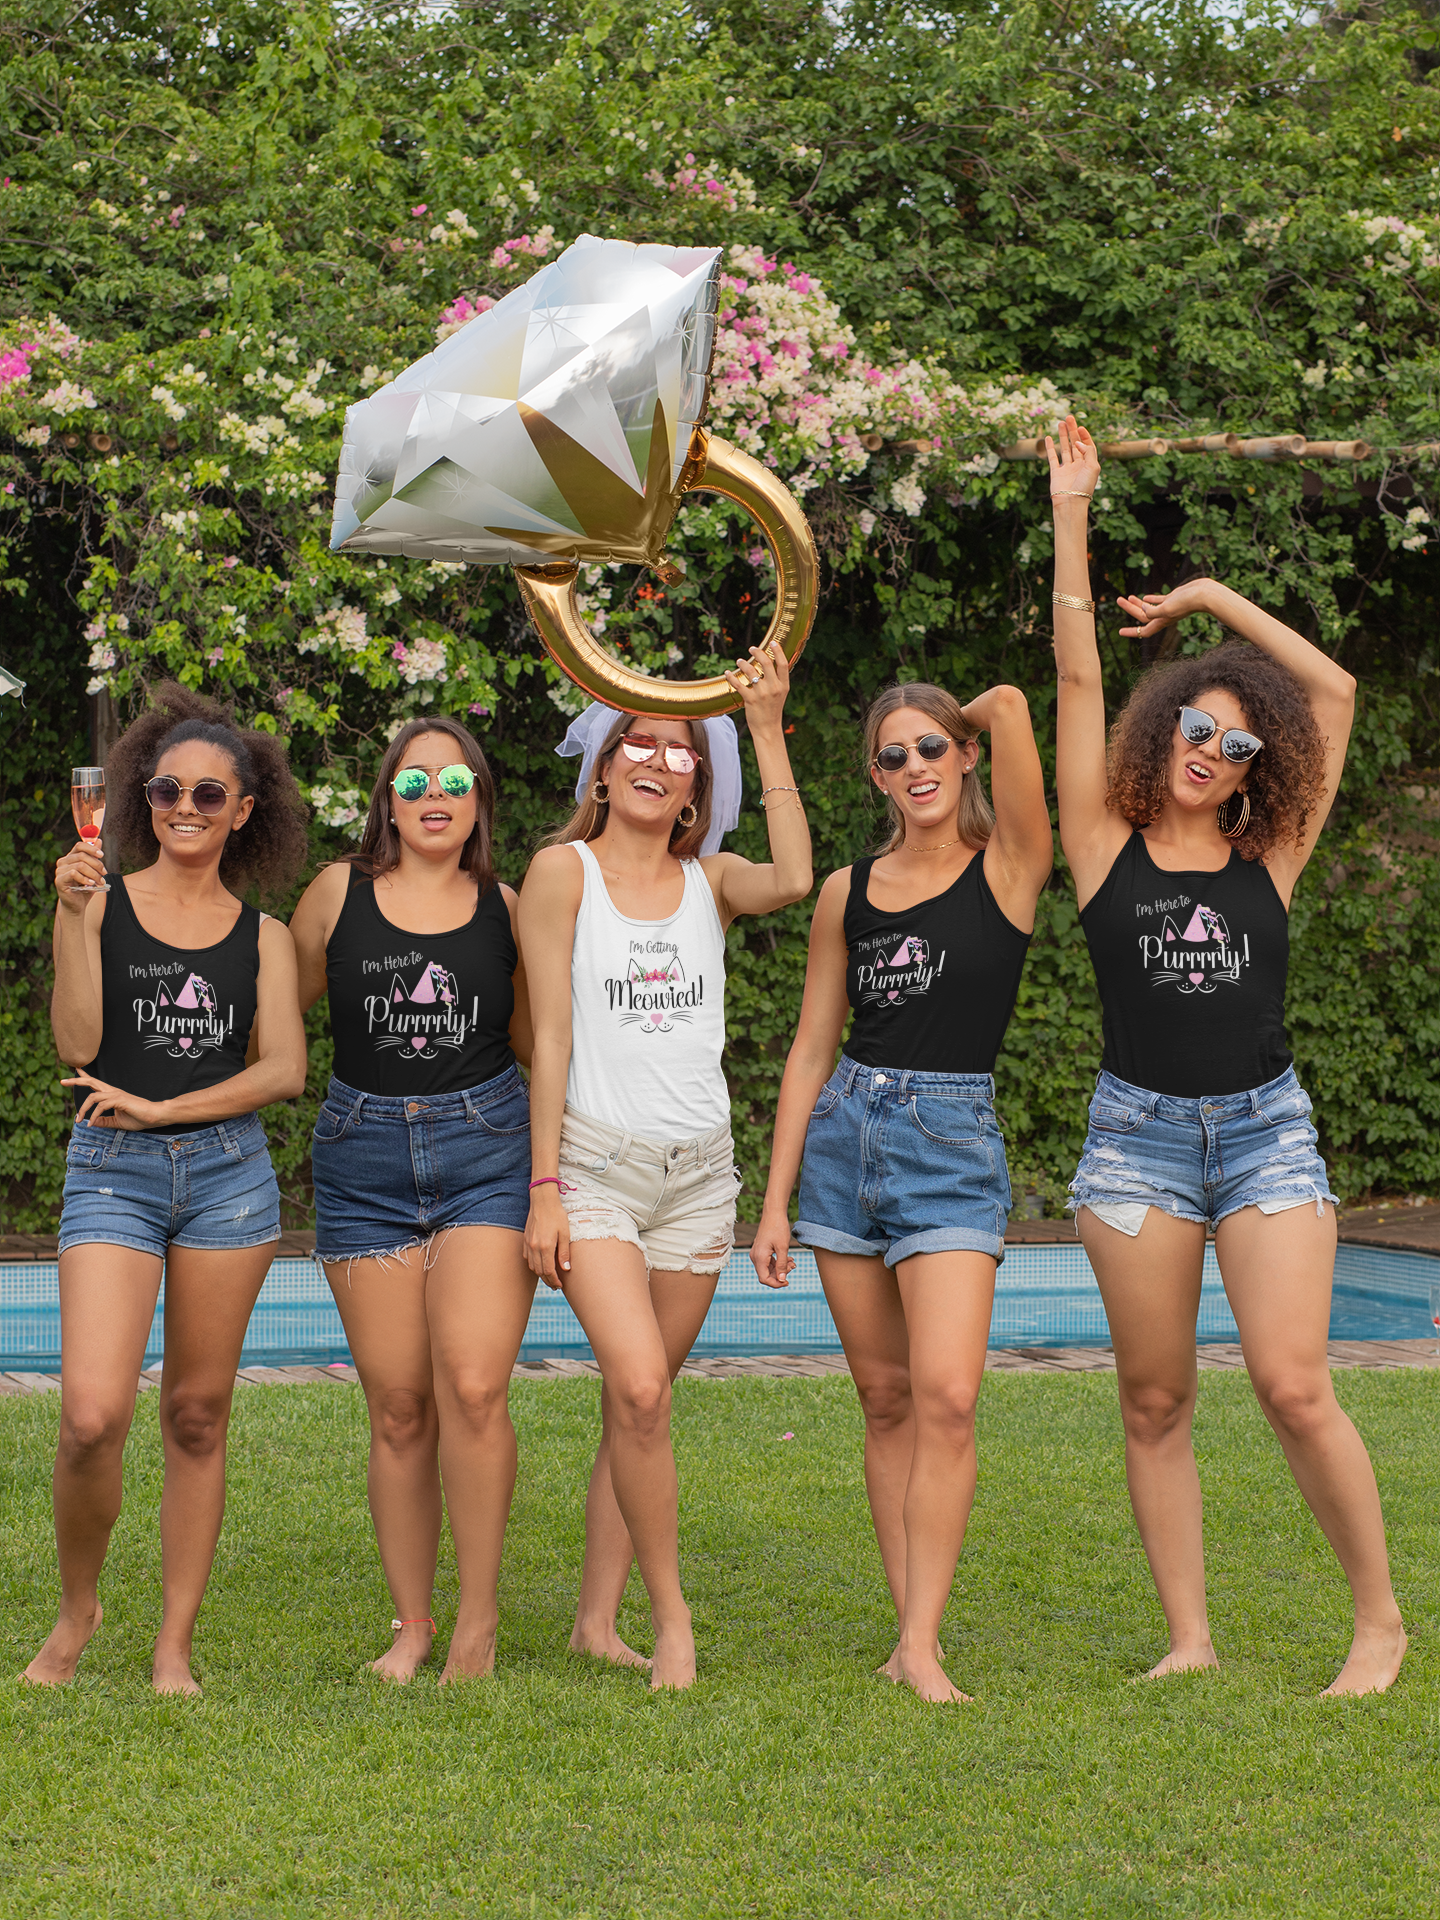 bride and bridemaid at bachelorette party wearing funny and cute cat shirts